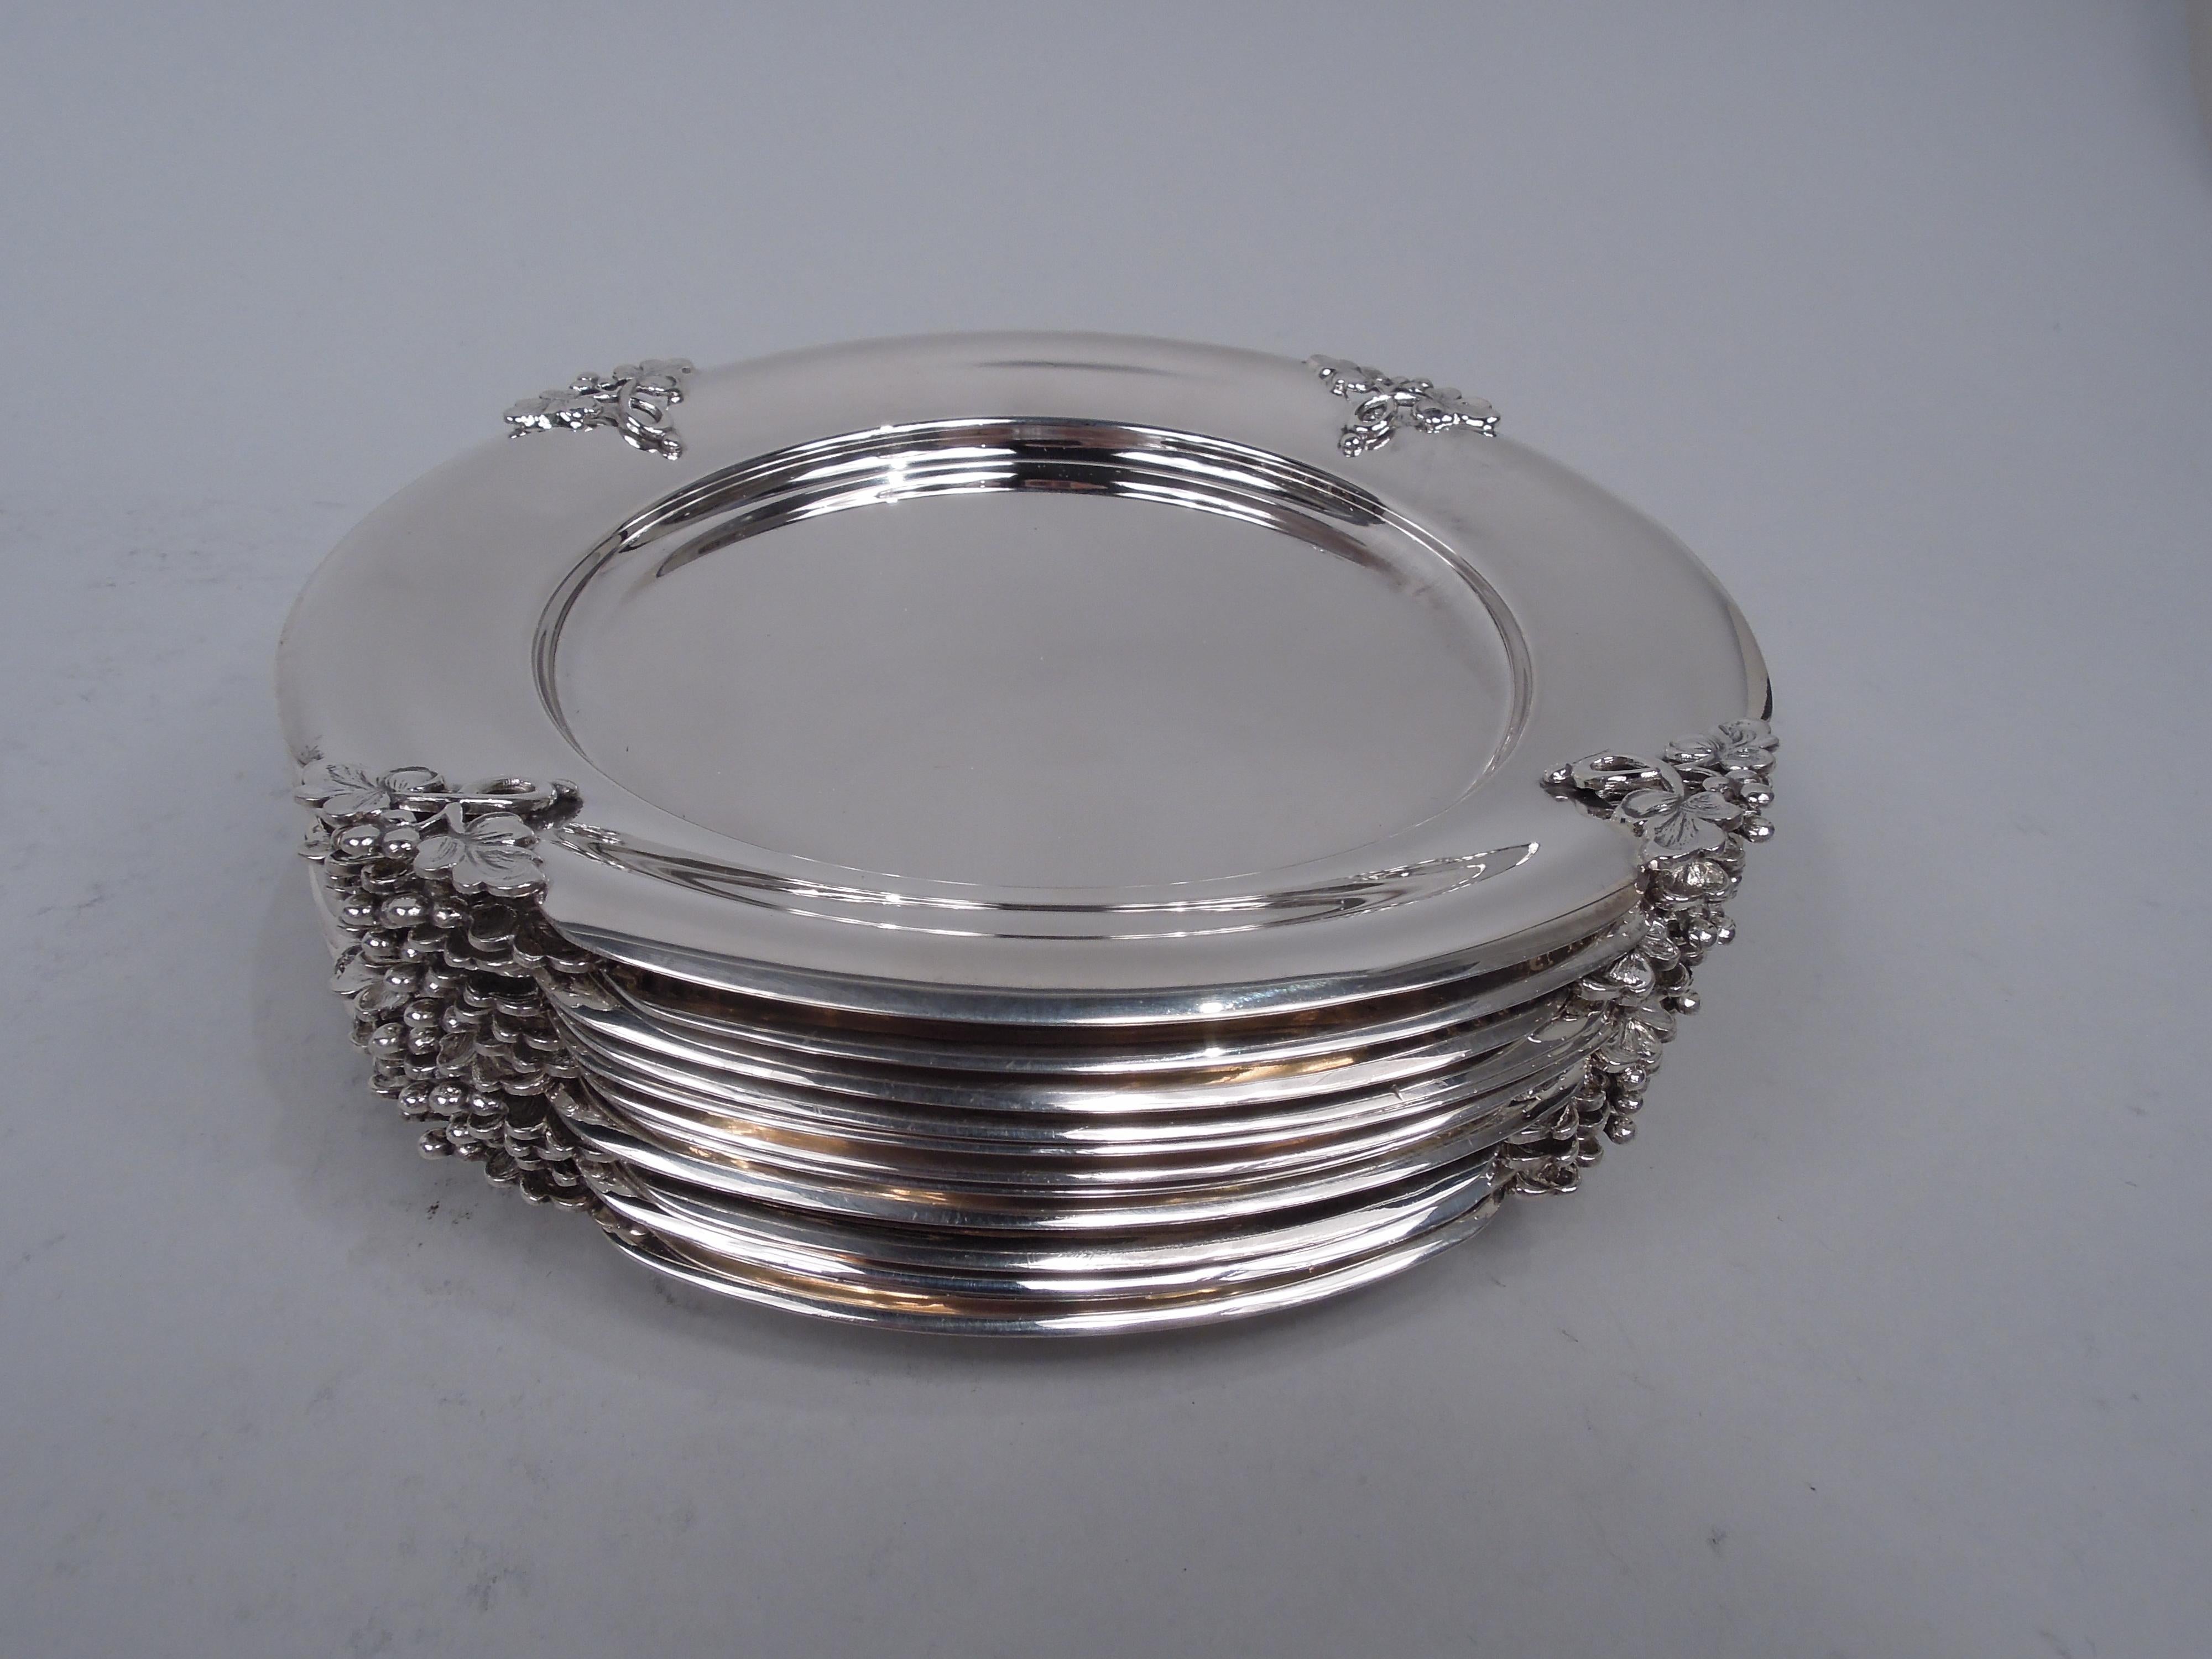 Alexandria sterling silver bread and butter plates. Made by Fisher Silversmiths in Jersey City, New Jersey. Each: Round well and concave shoulder interspersed with 4 open leafing tendrils mounted to cutout triangles. Fully marked including maker’s